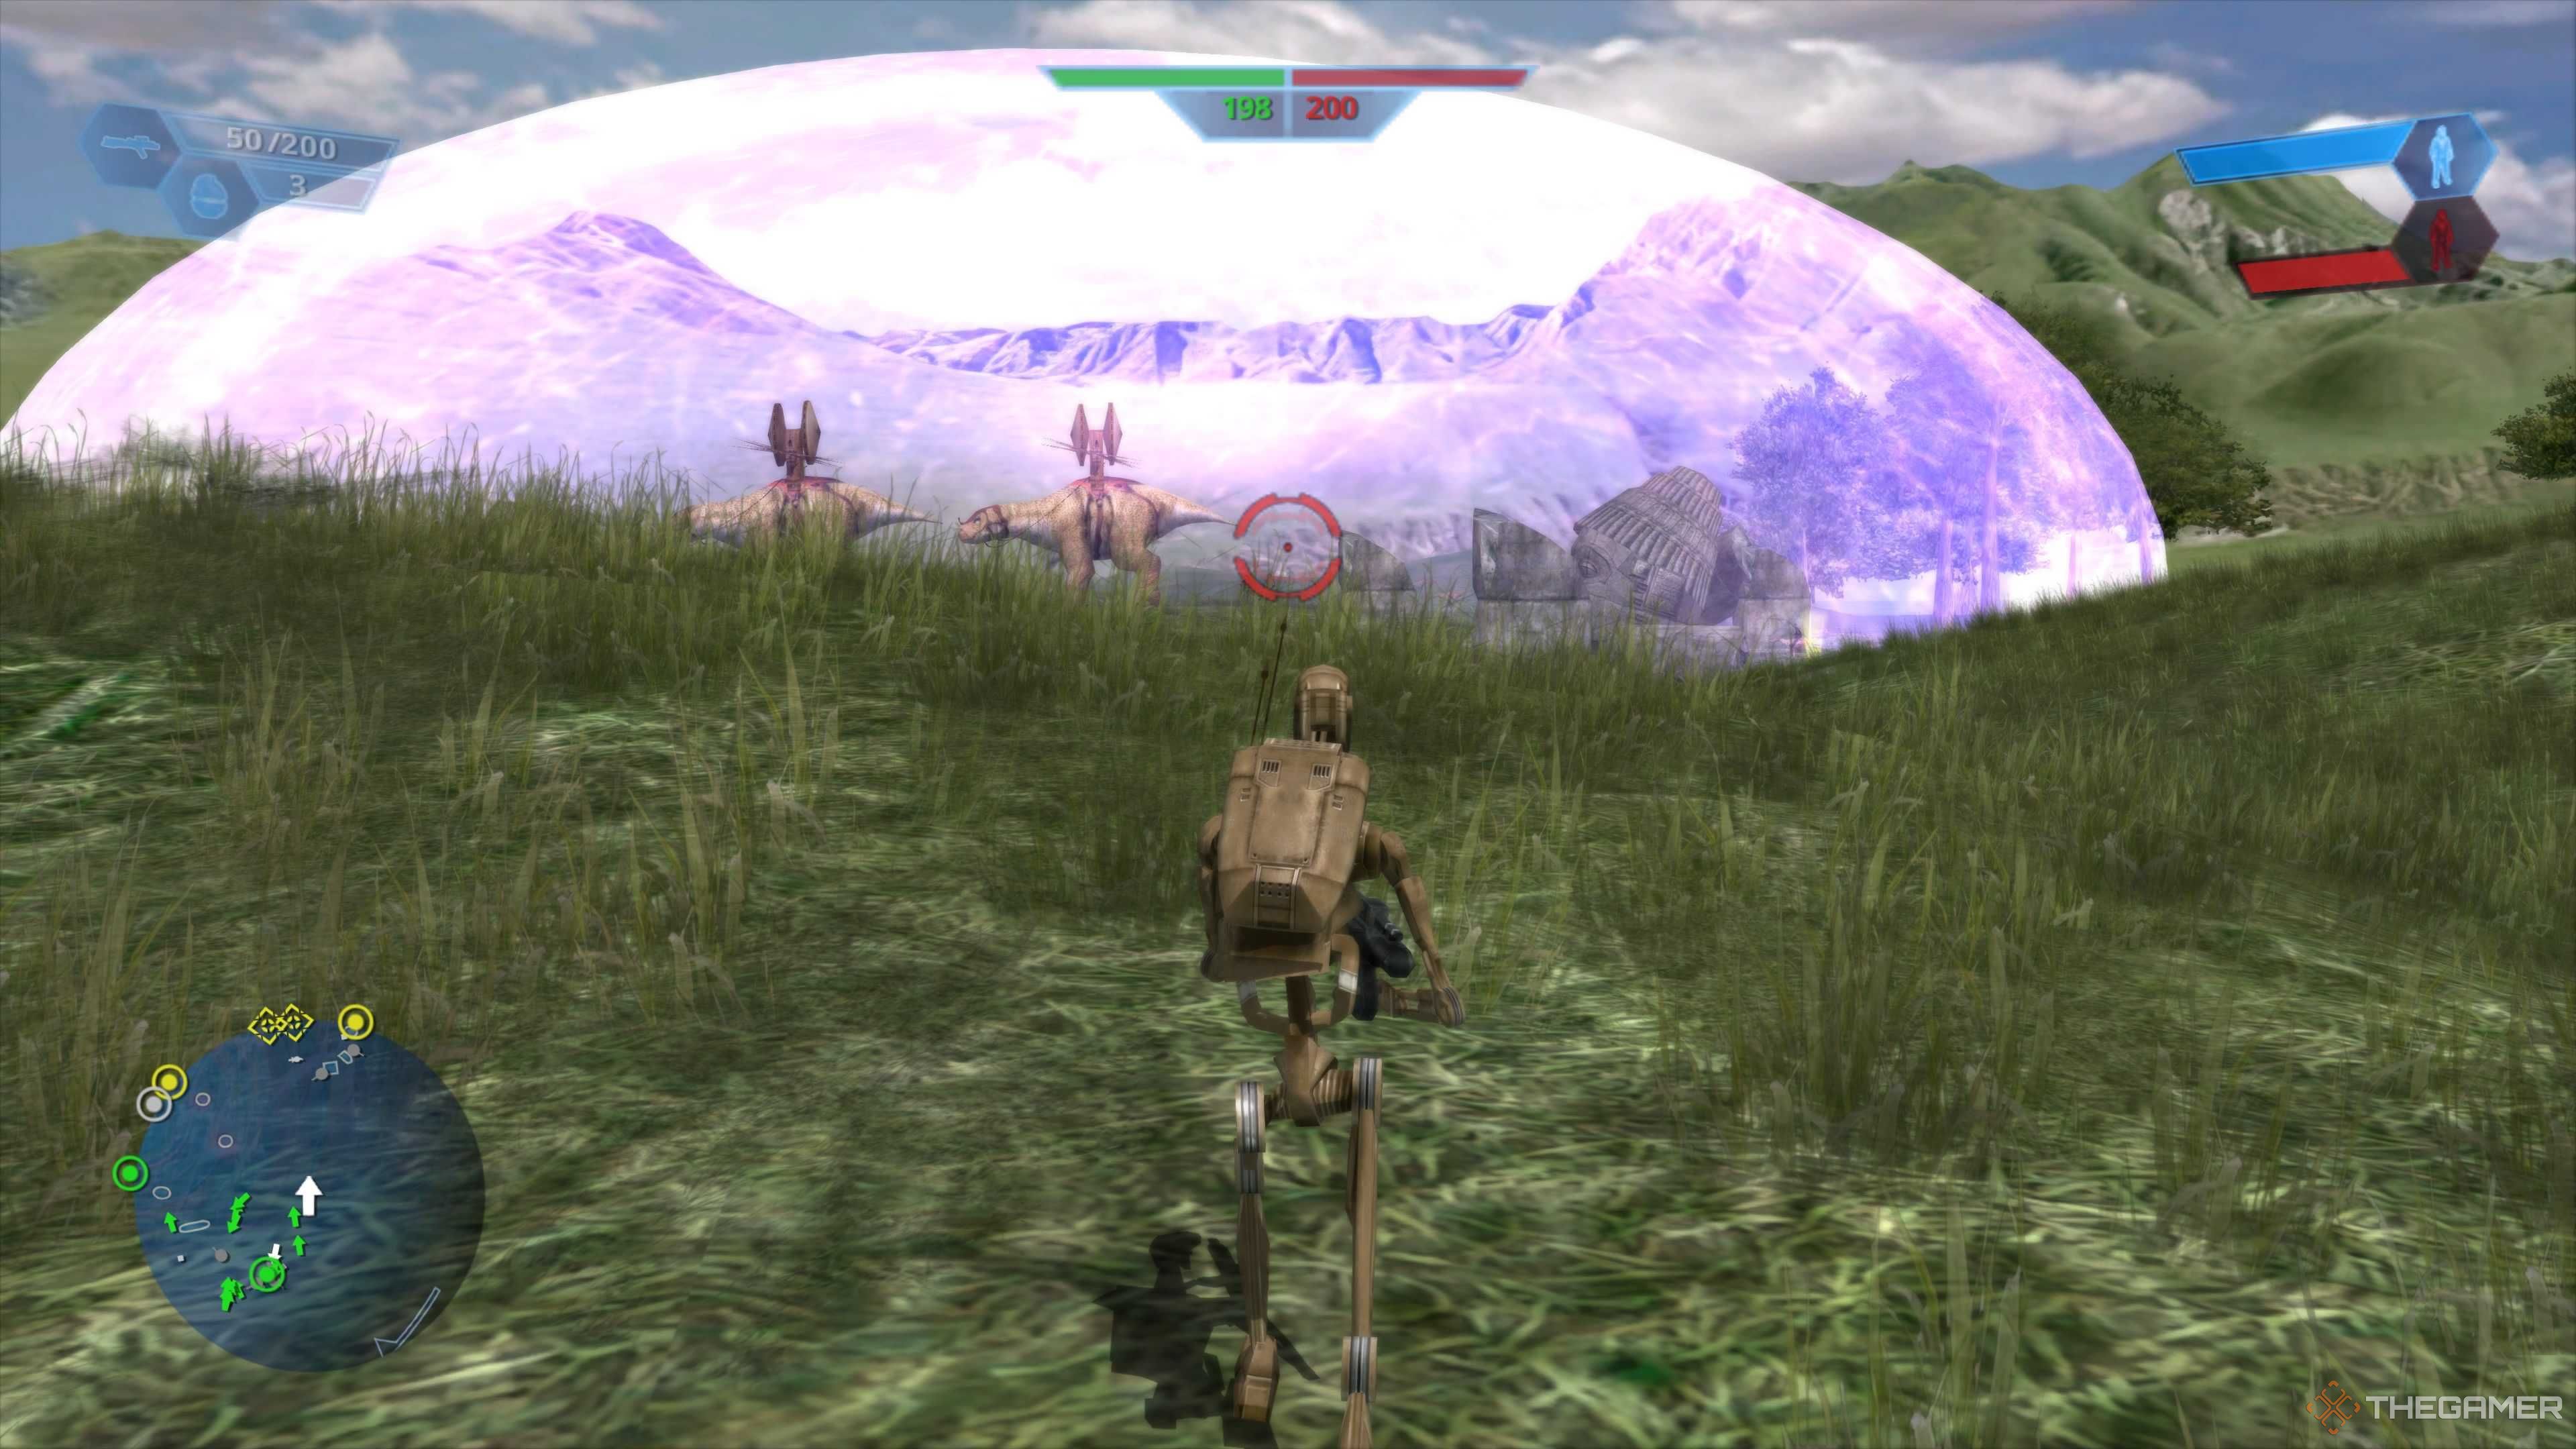 Star Wars Battlefront droid running towards the giant purple forcefield in the plains of Naboo, fighting Gungans